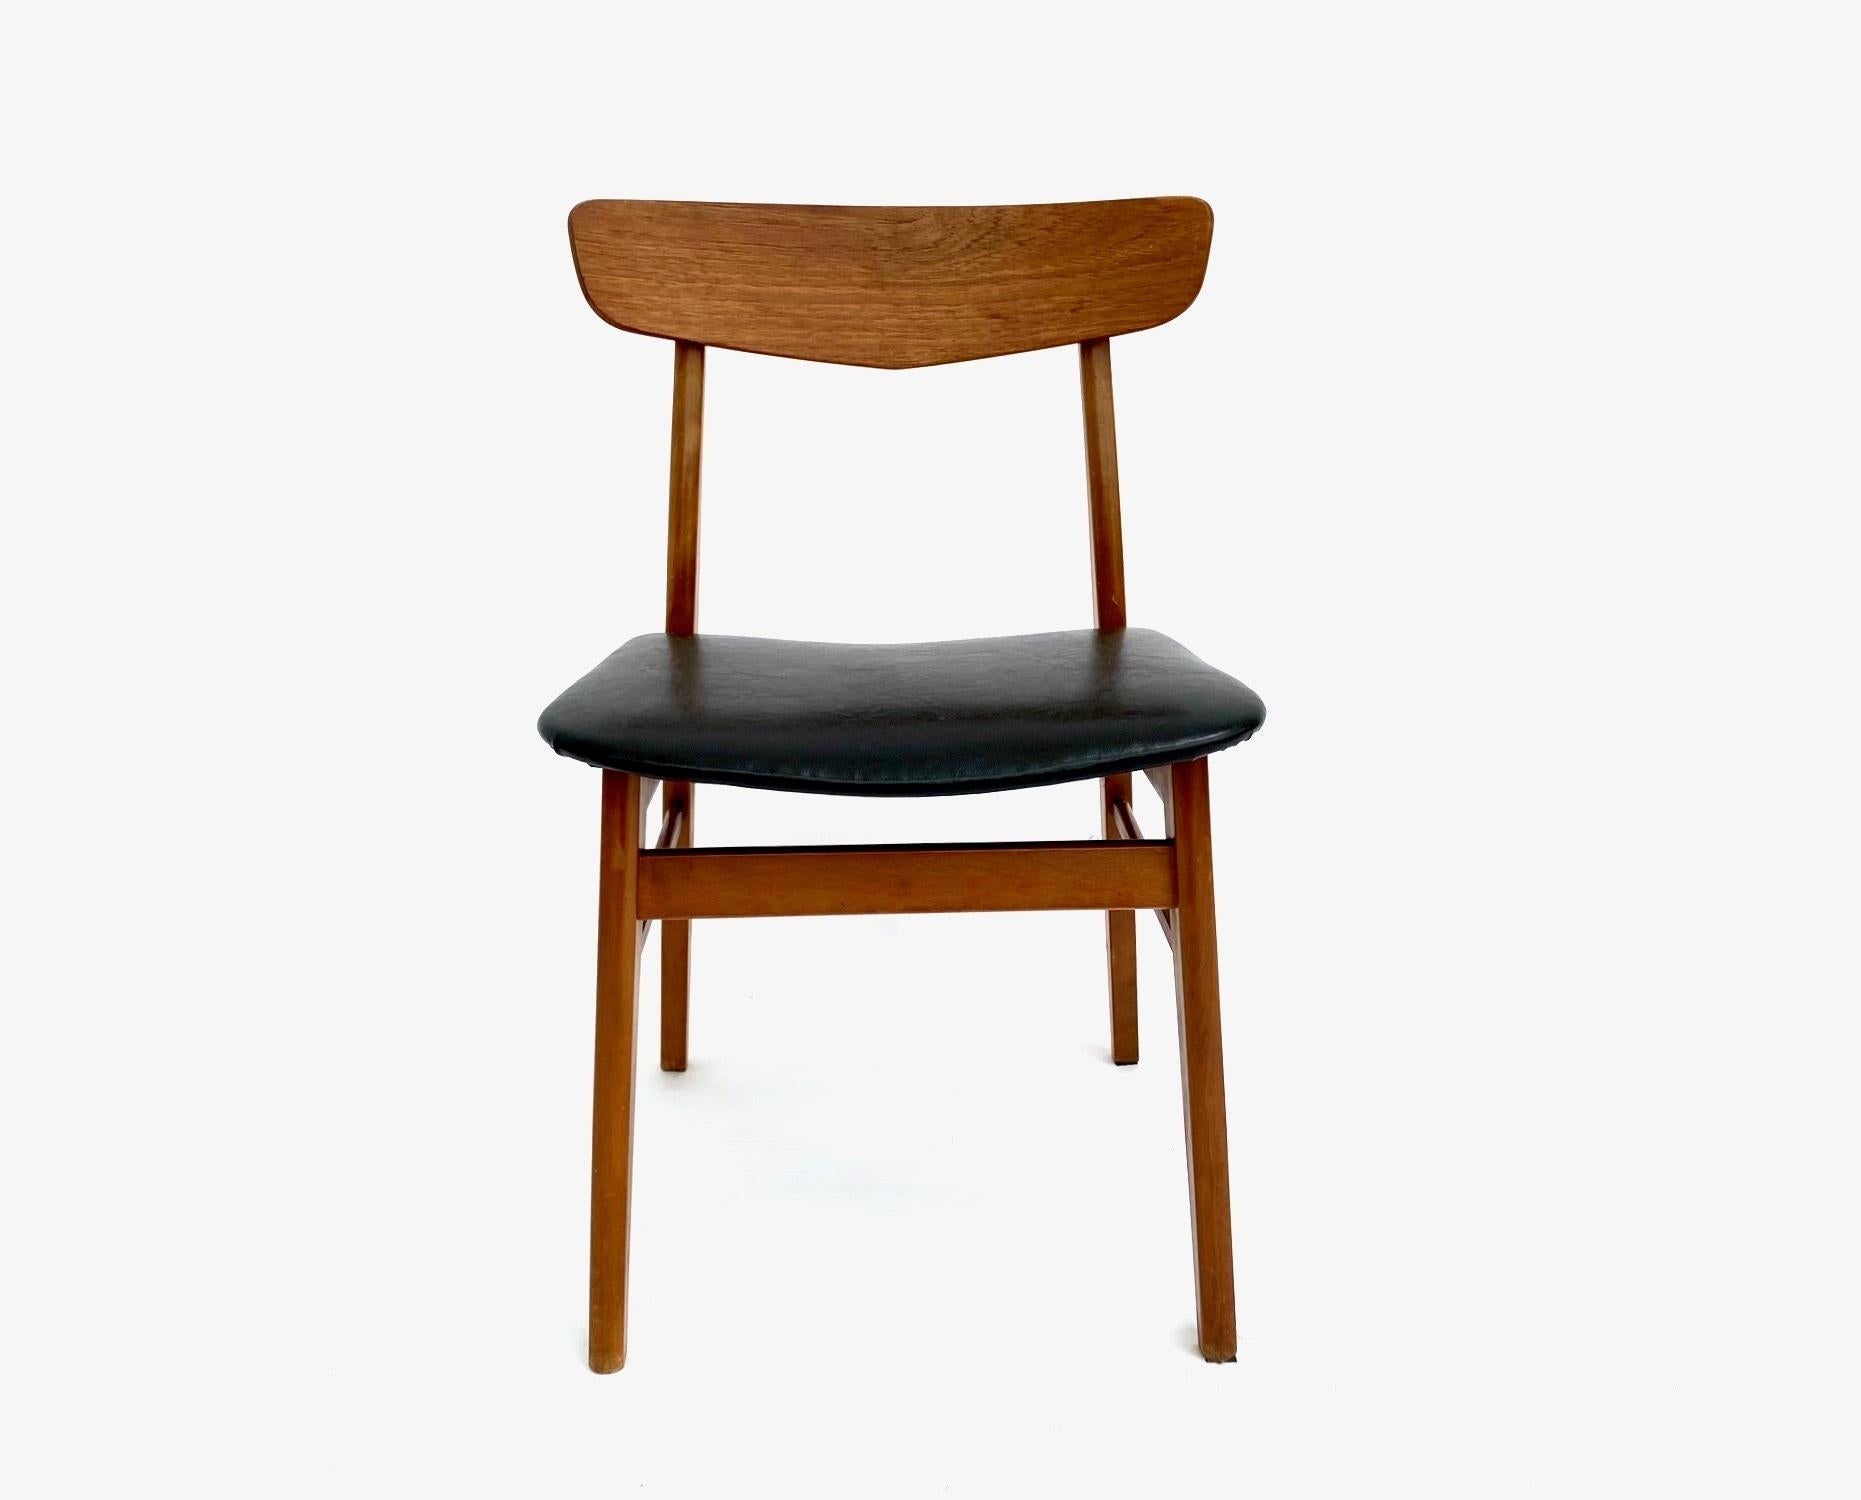 A beautiful set of 4 teak & beech black vinyl dining chairs by Farstrup, these would make a stylish addition to any dining area.

The chairs have wide seat pads and sculptured timber backrests for enhanced comfort. A striking piece of classically